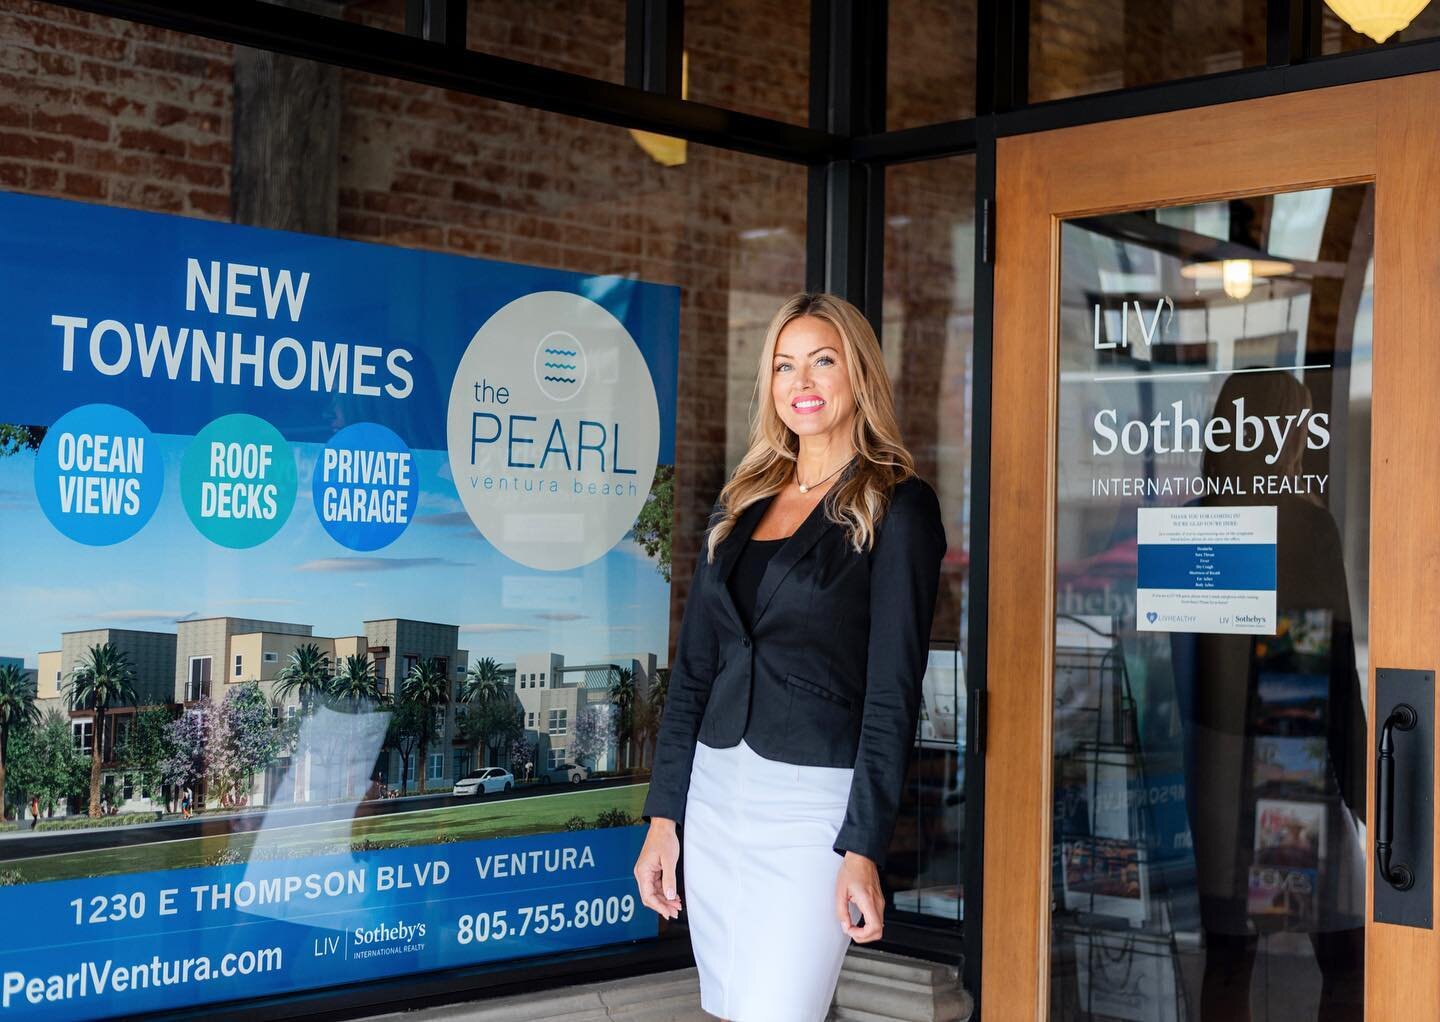 Big news - The Pearl is now live! This new development has 31 modern coastal-style townhomes with an arrangement of nine flexible floor plans up to 1,791 sq. ft. Situated between downtown and walking distance to the pier, this incredible opportunity 